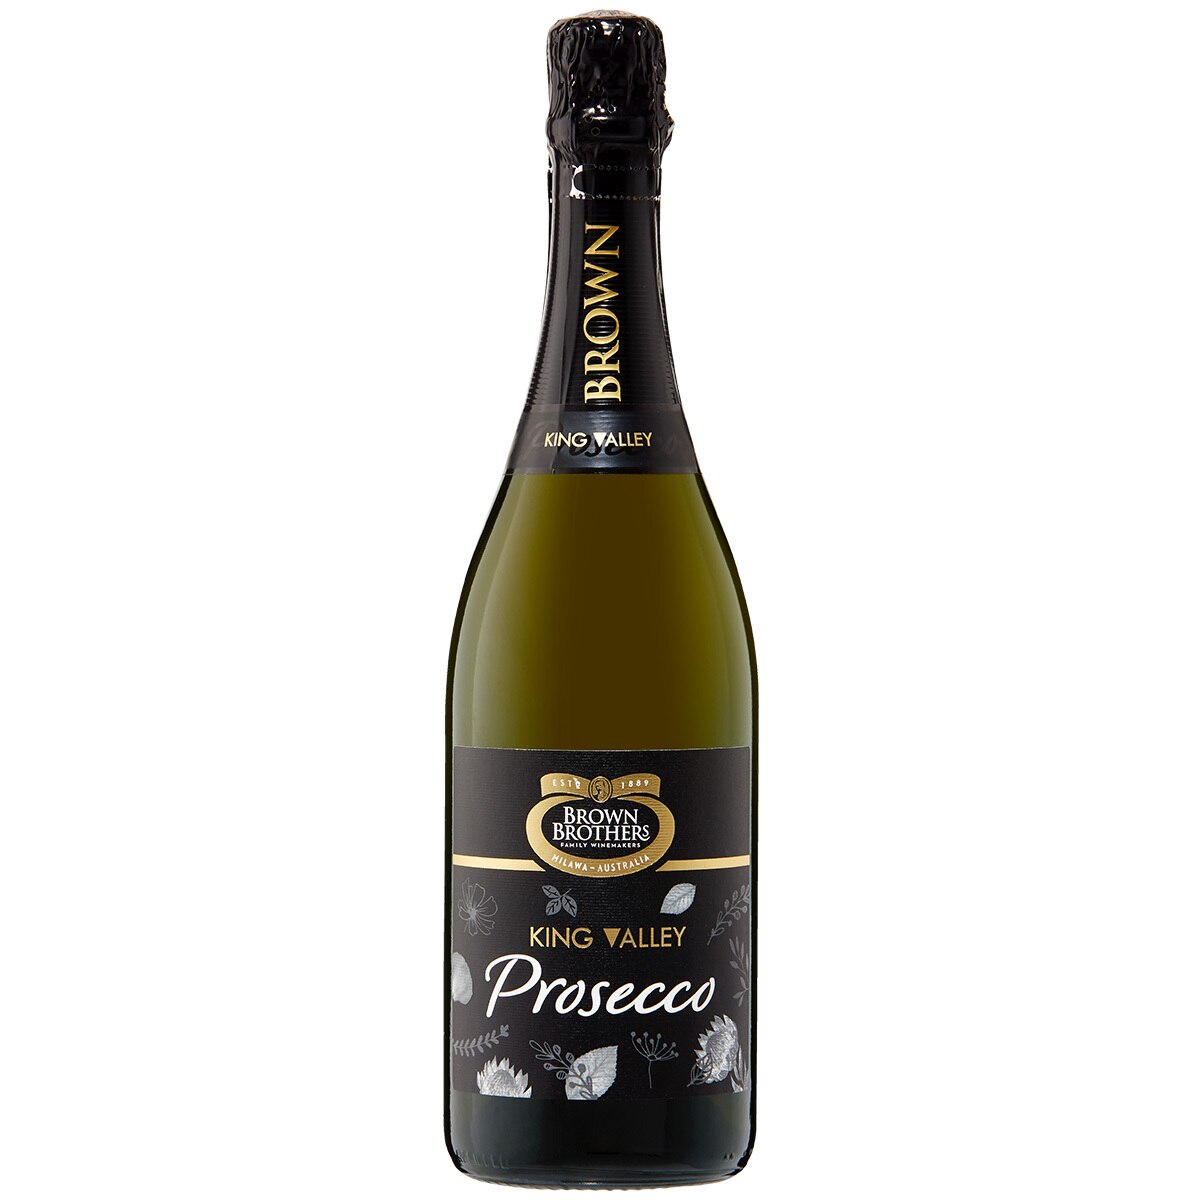 Brown Brothers Prosecco 6 x 750ml